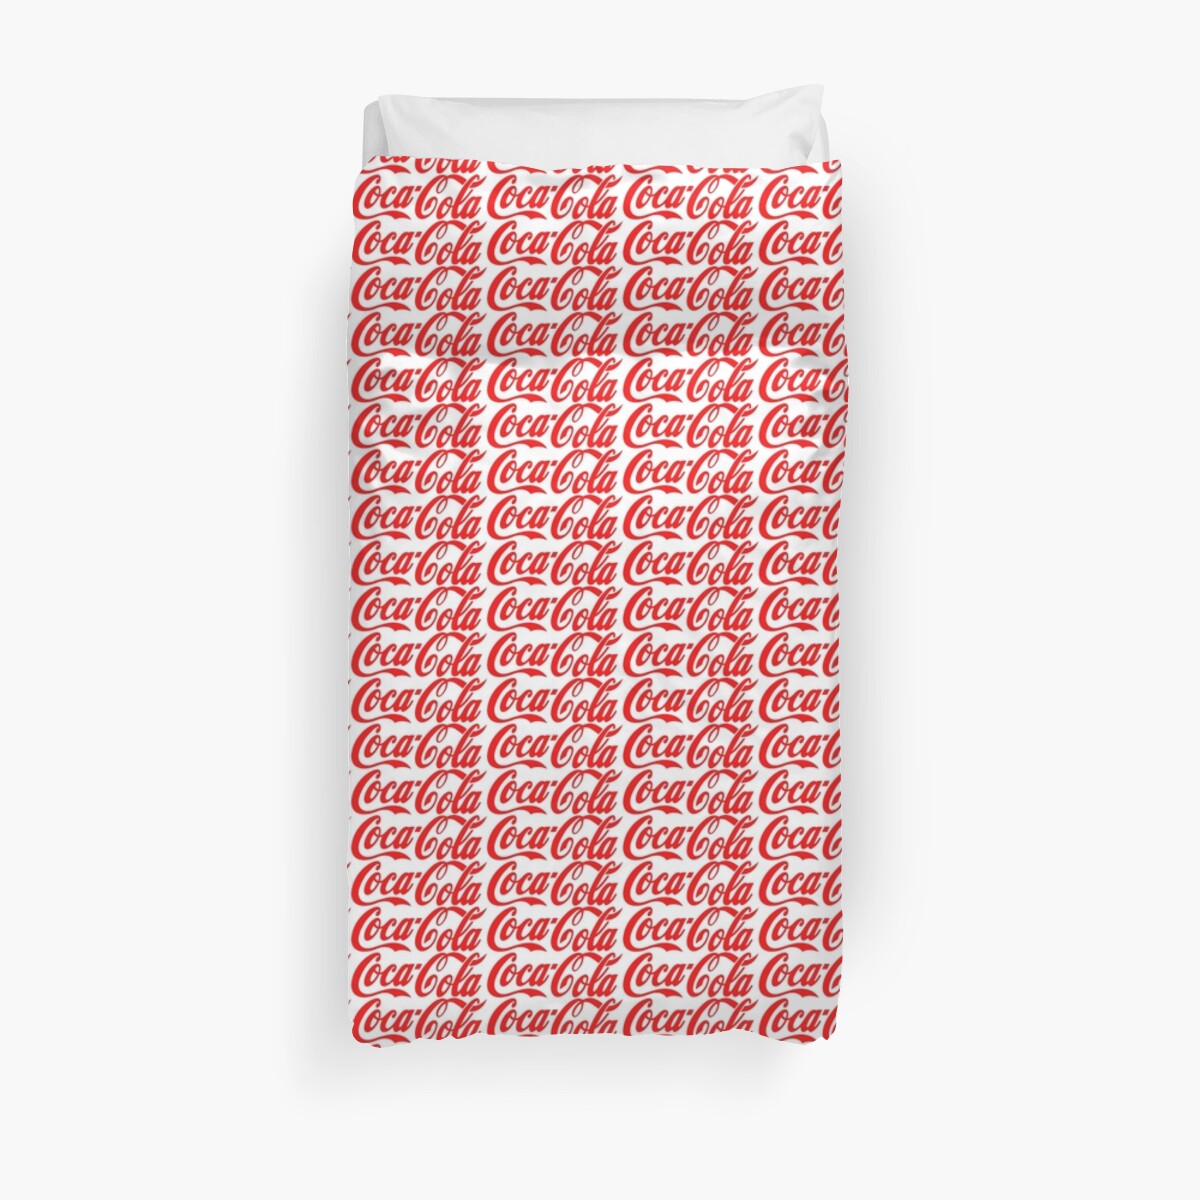 Coca Cola Duvet Cover By Ivoxrs Redbubble